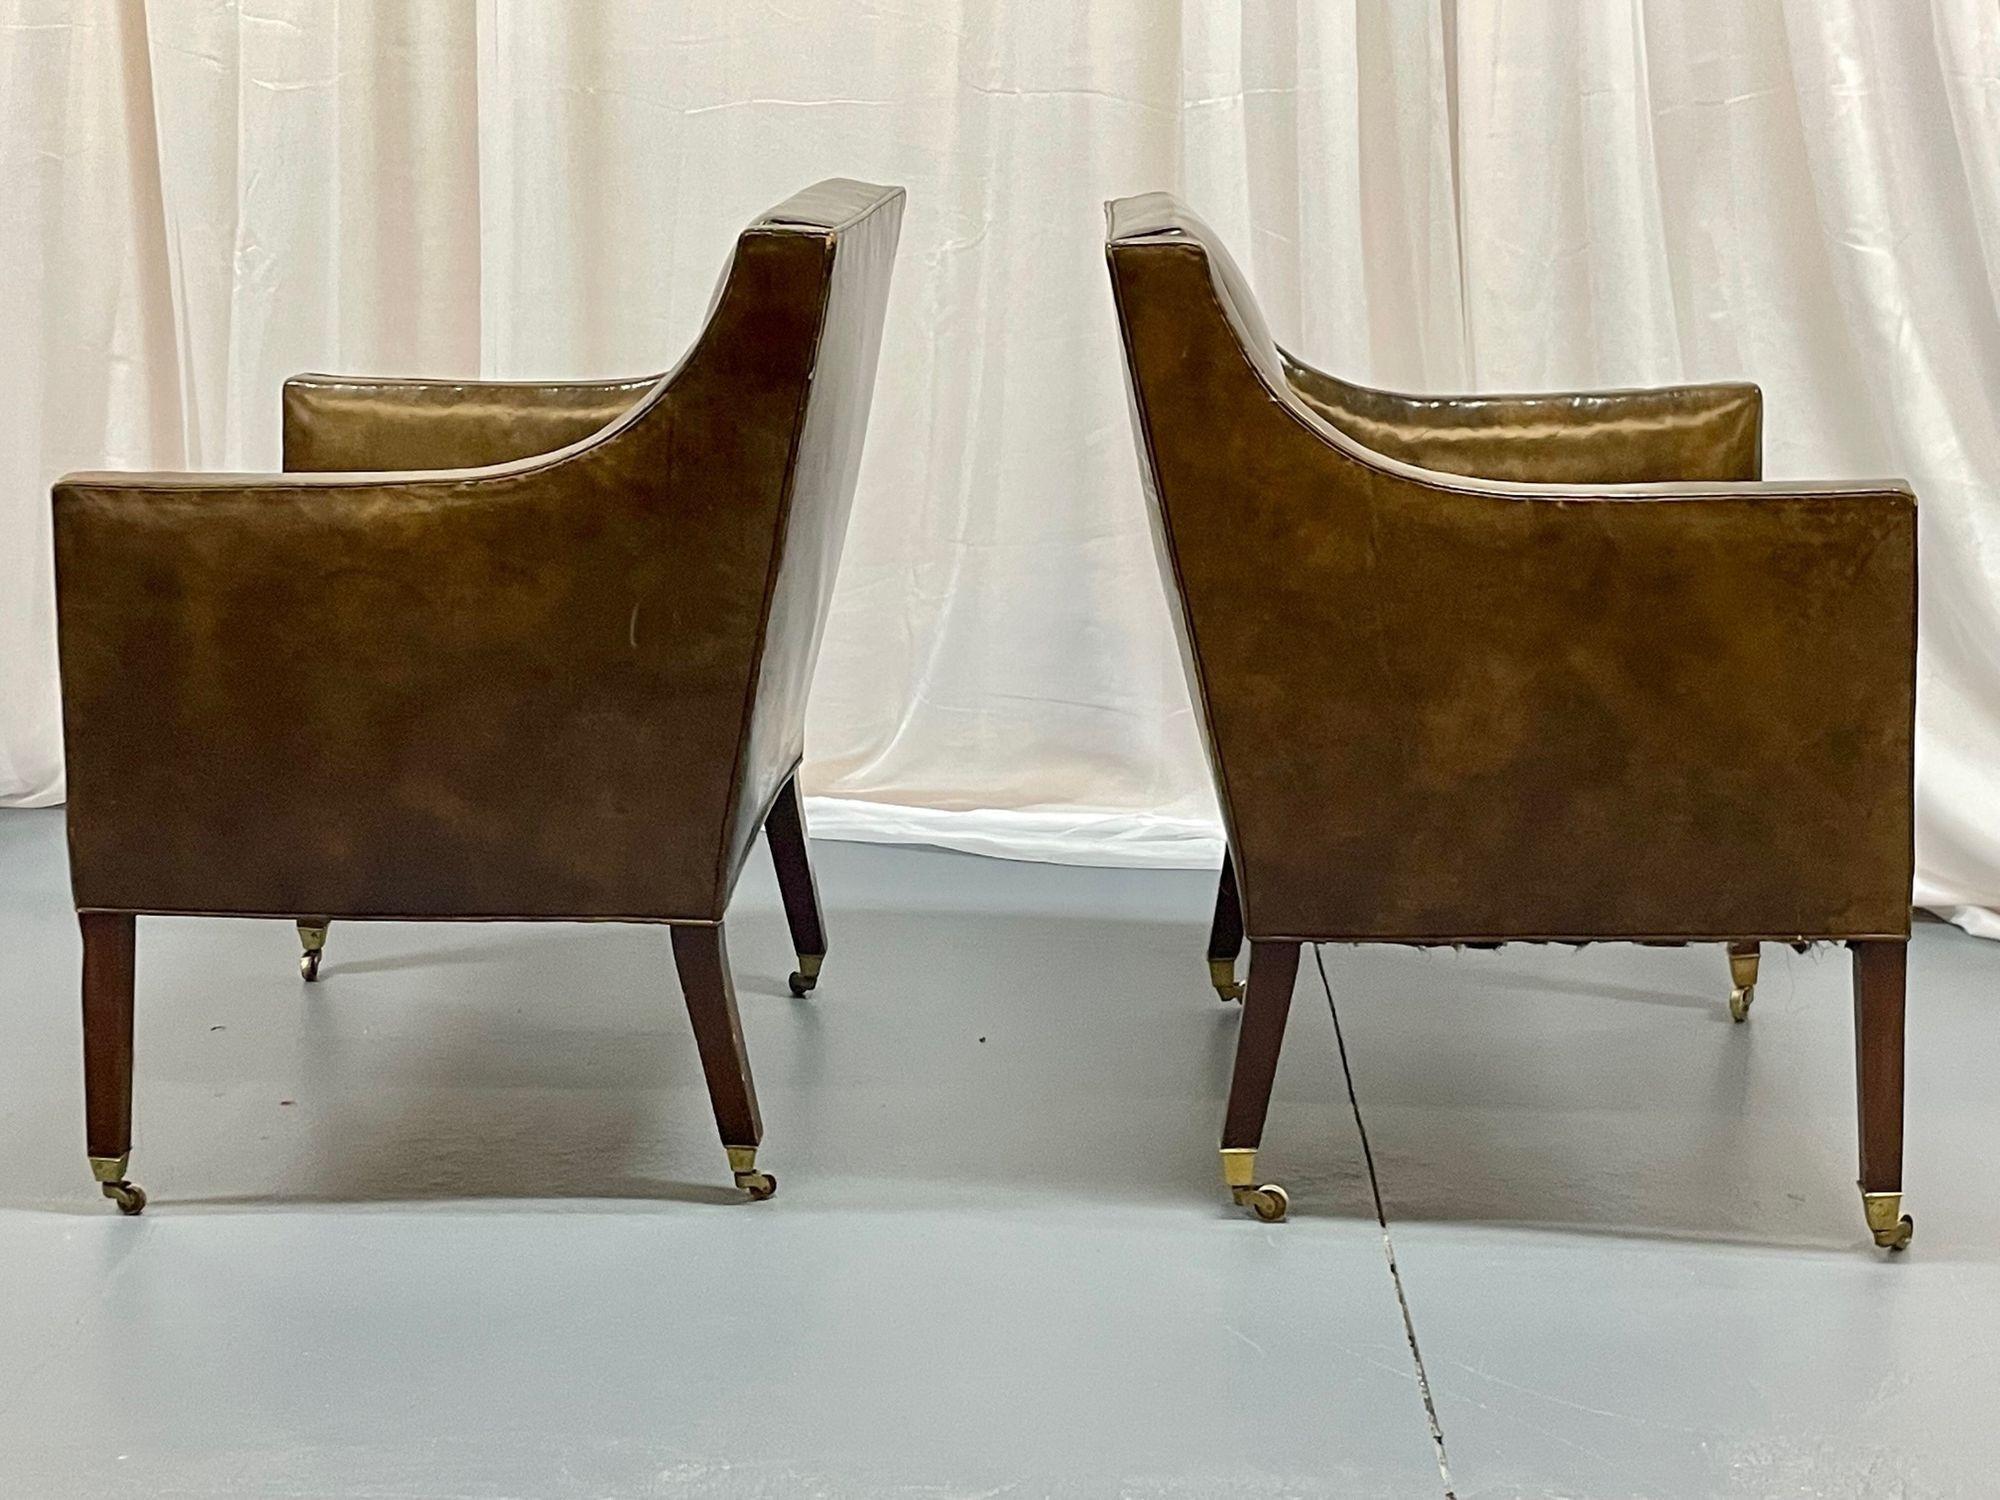 Pair of Patinated Regency Style Leather Upholstered Armchairs / Lounge, Bronze In Good Condition For Sale In Stamford, CT